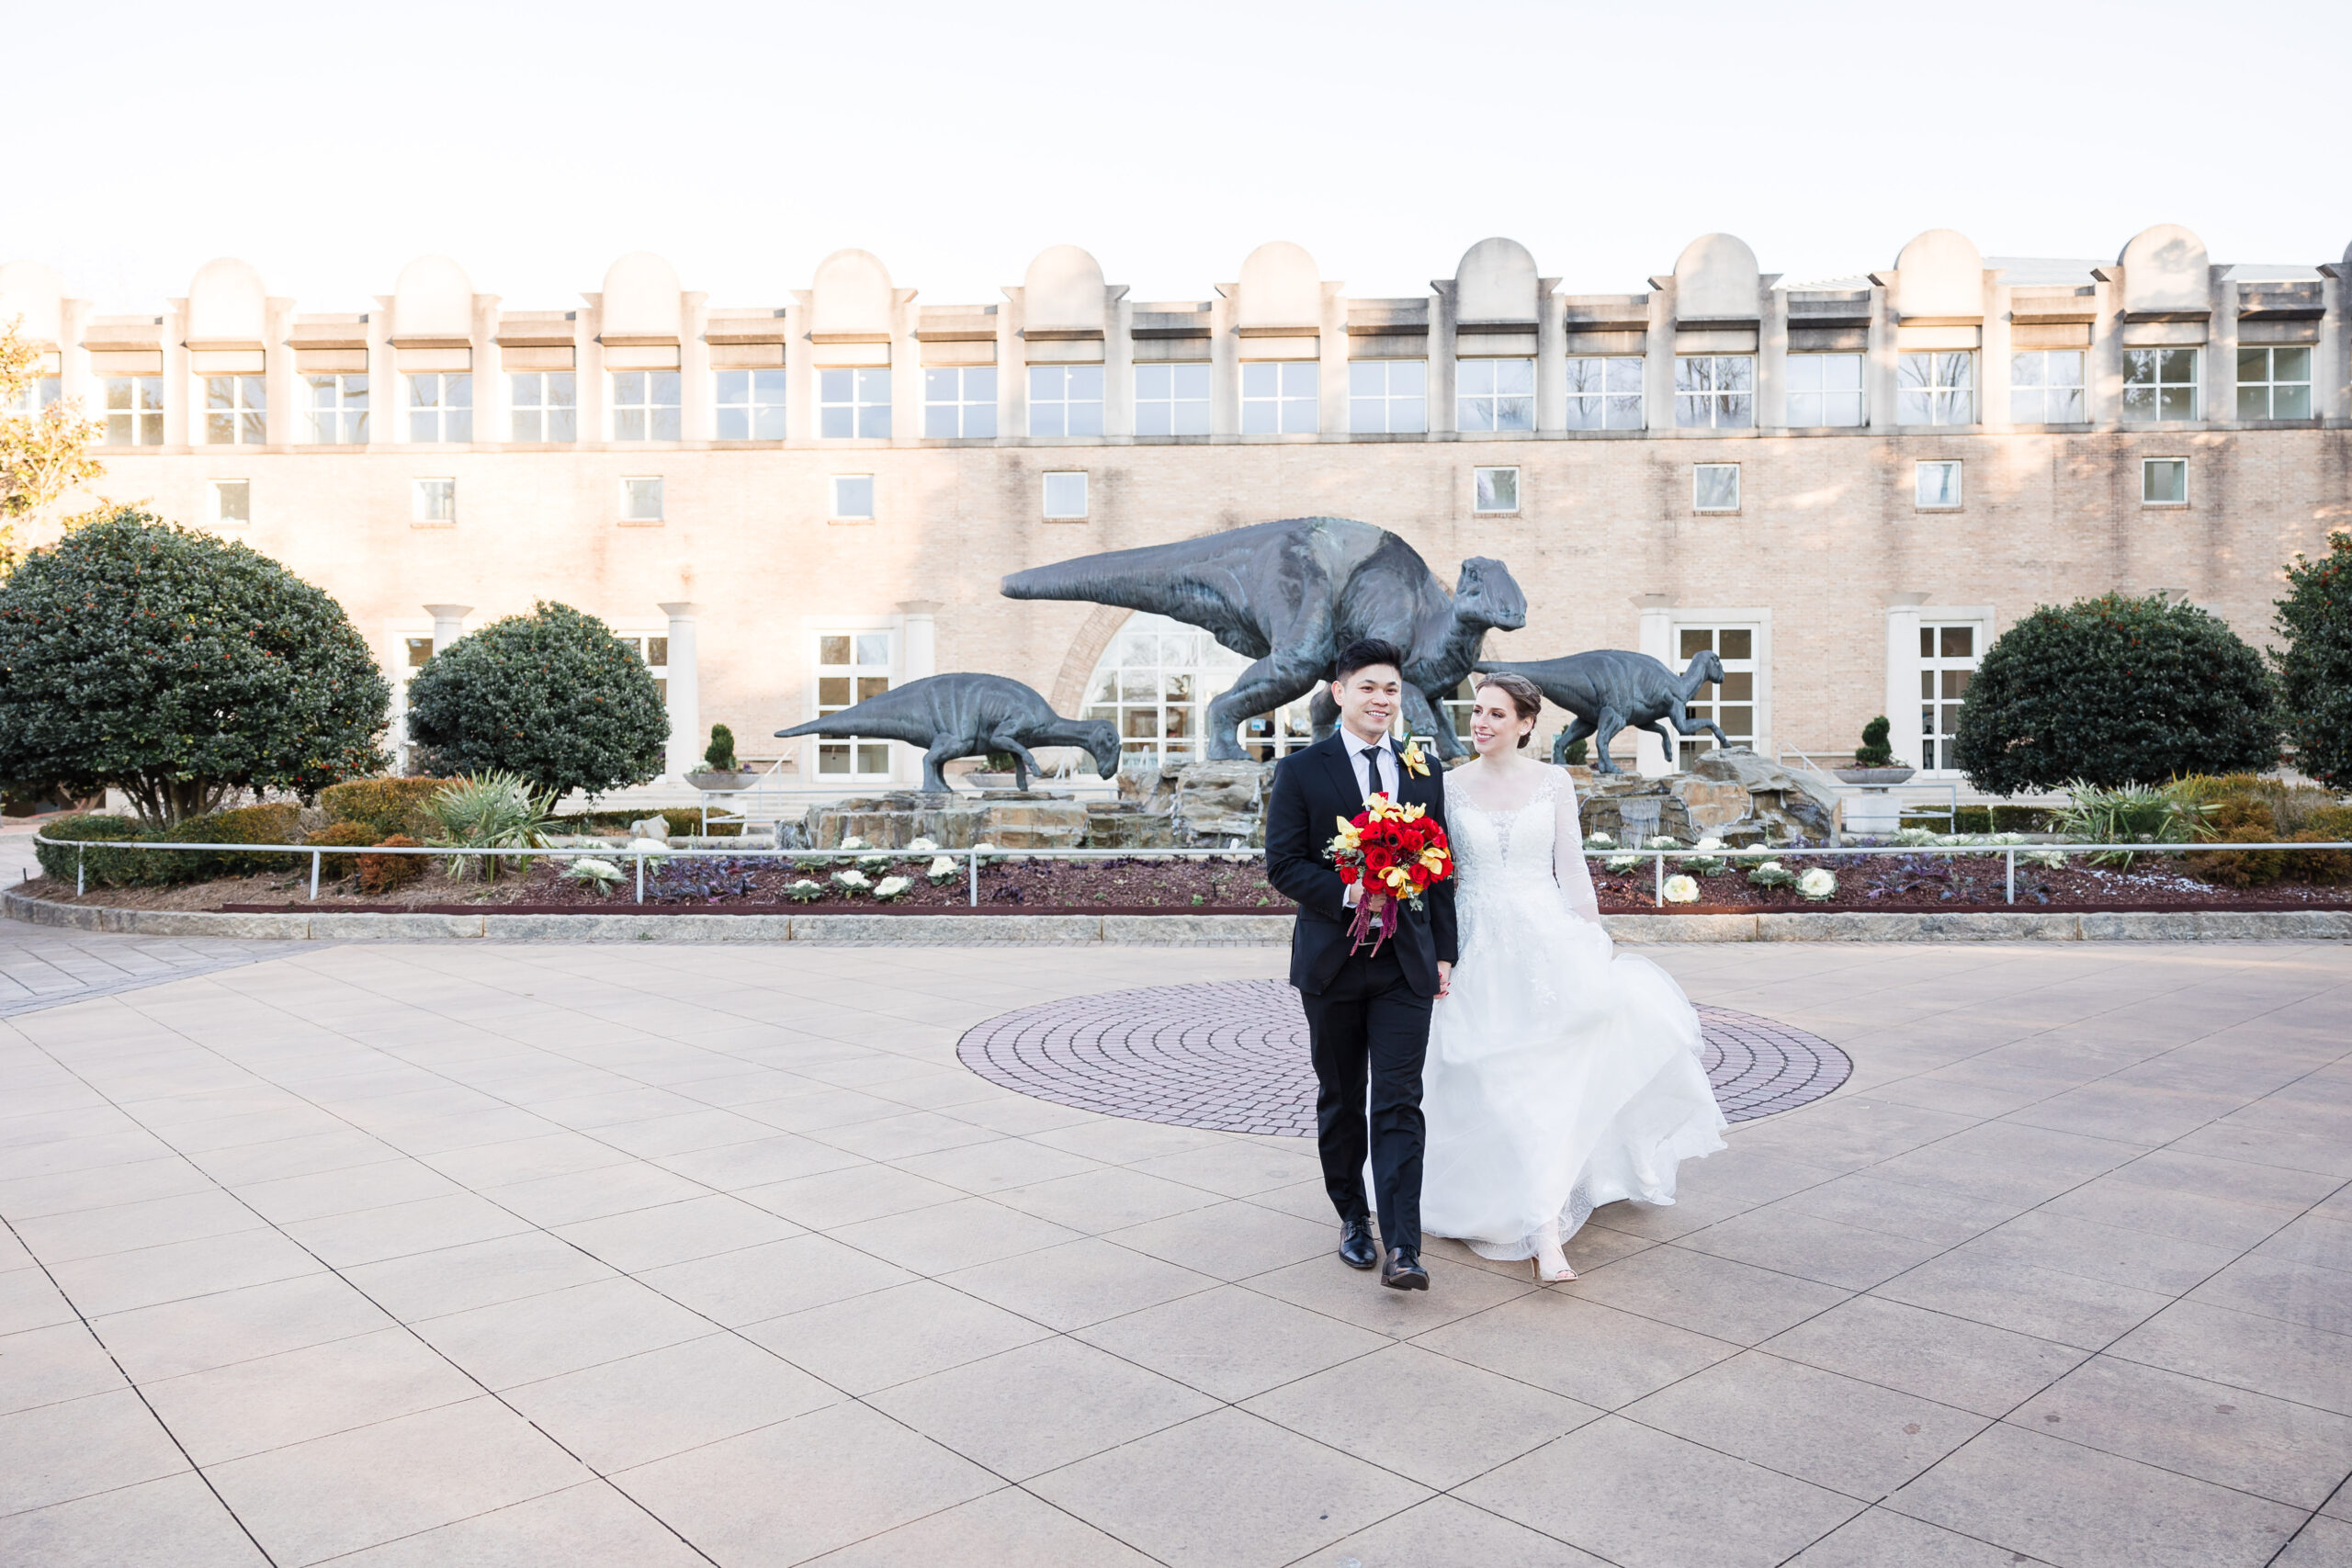 Brian and Rochelle holding hands at the front facade of Fernbank Museum